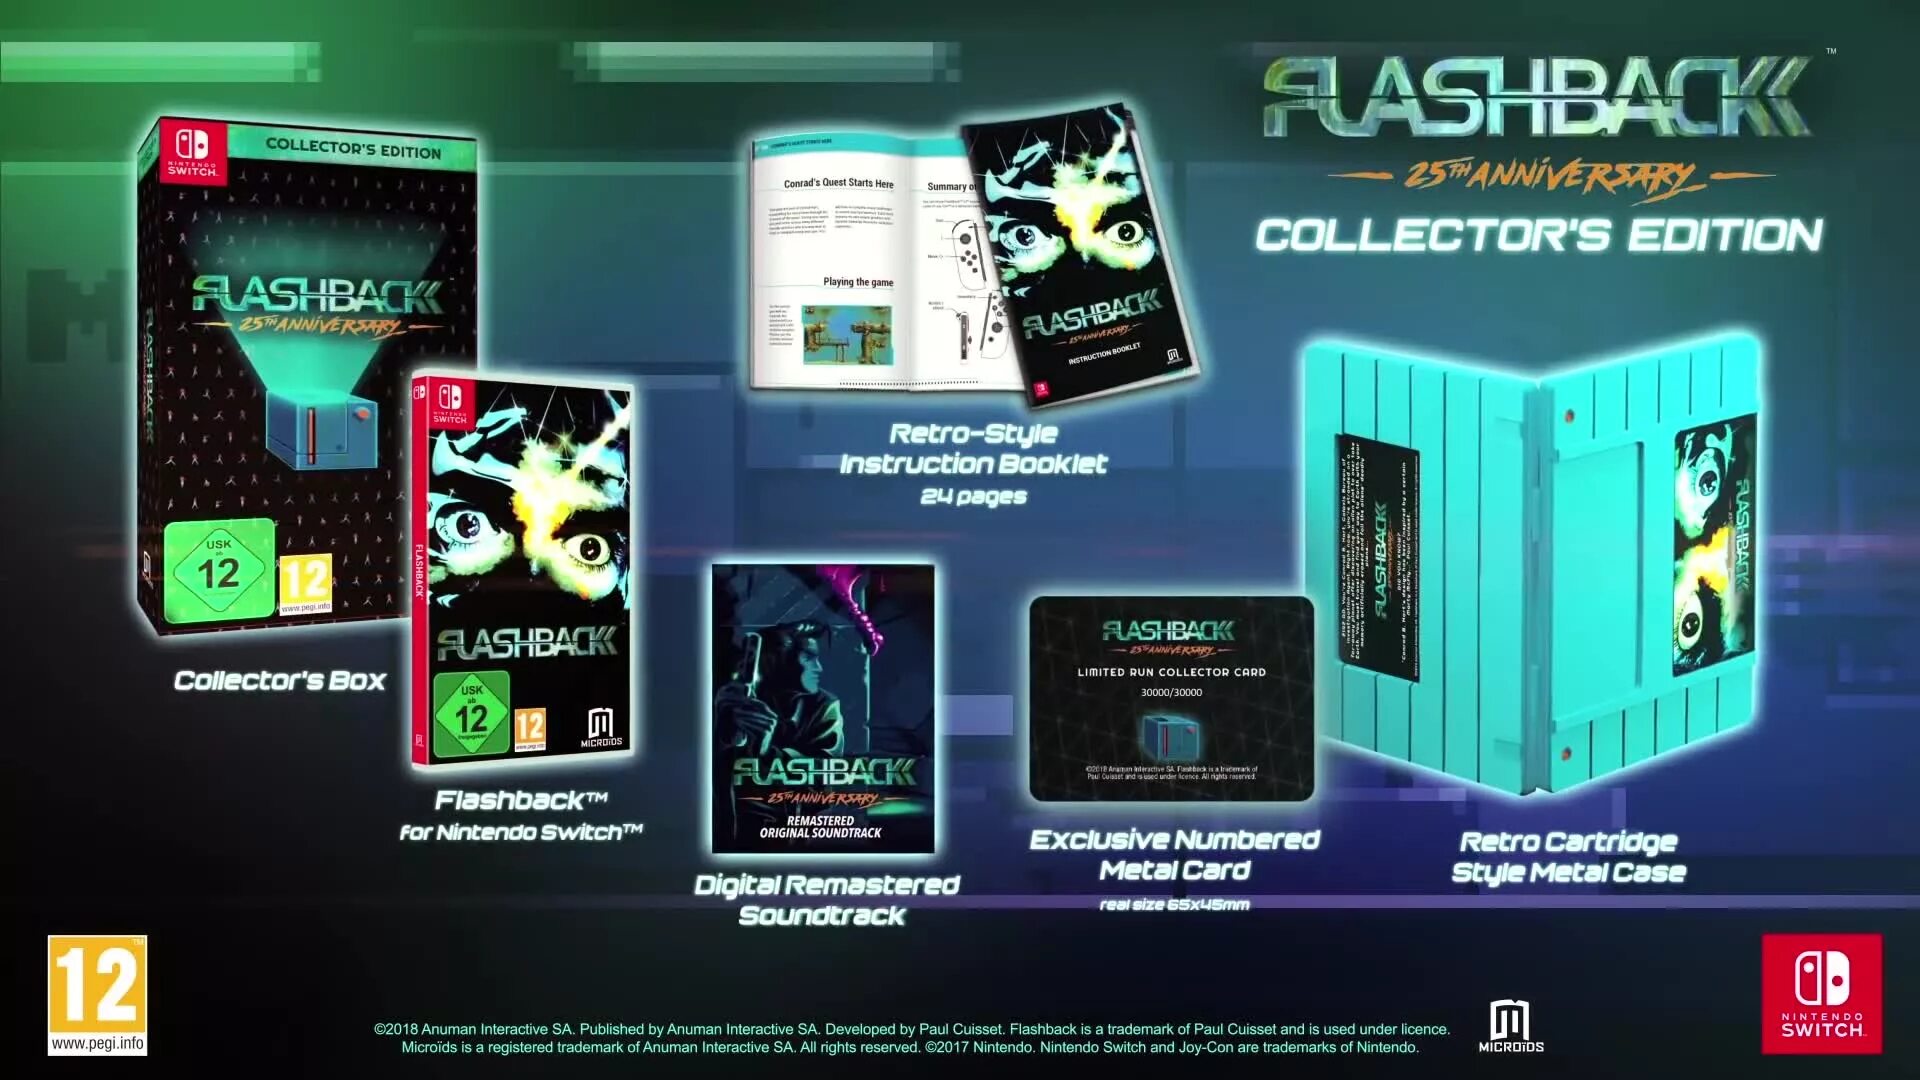 Classic games collection. Игра Flashback Nintendo Switch. Flashback 25th Anniversary Collectors Edition. Flashback Collector's Edition. Игра Flashback Limited Edition.